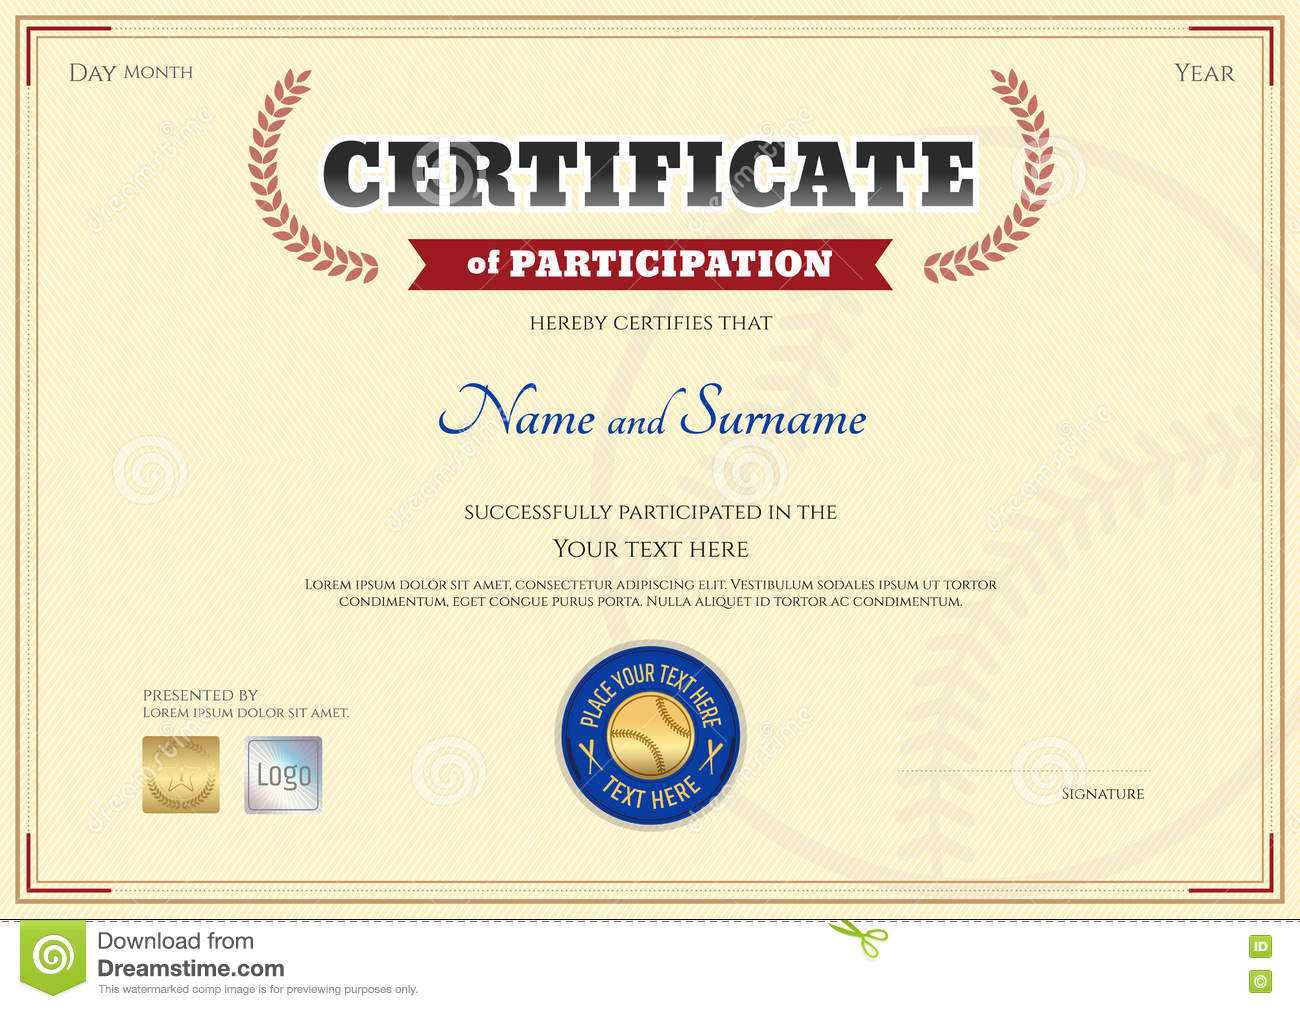 Certificate Of Participation Template In Baseball Sport Throughout Free Templates For Certificates Of Participation